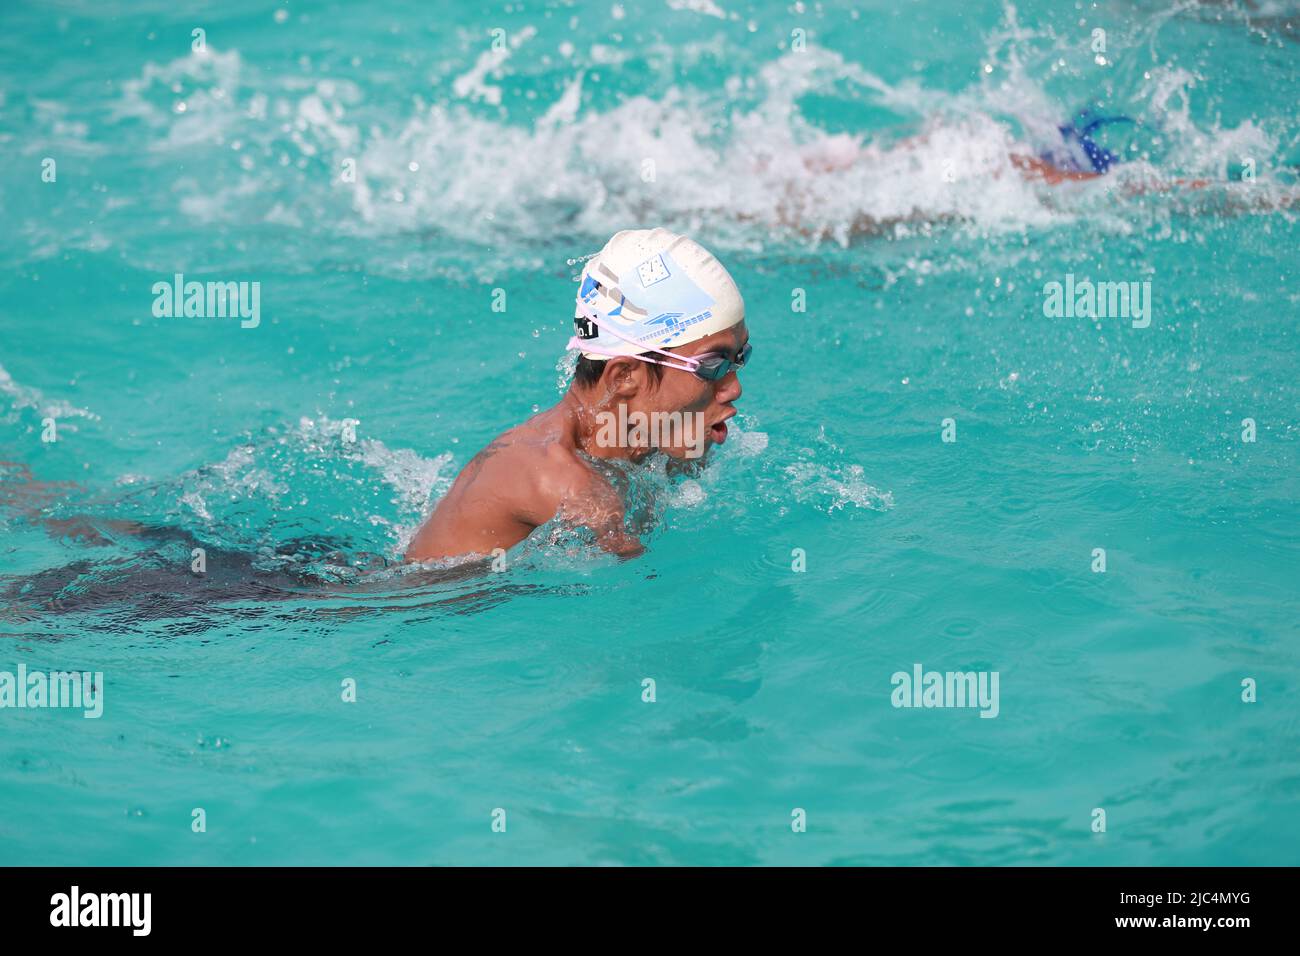 Yangon, Myanmar. 9th June, 2022. A Myanmar's swimmer trains for the upcoming 2022 ASEAN Para Games in Yangon, Myanmar, June 9, 2022. Myanmar will send a contingent of over 90 athletes with disabilities to compete at the upcoming 2022 ASEAN Para Games, Myo Myint, Vice President of the Myanmar Paralympic Sports Federation (MPSF), told Xinhua on Thursday. Credit: U Aung/Xinhua/Alamy Live News Stock Photo